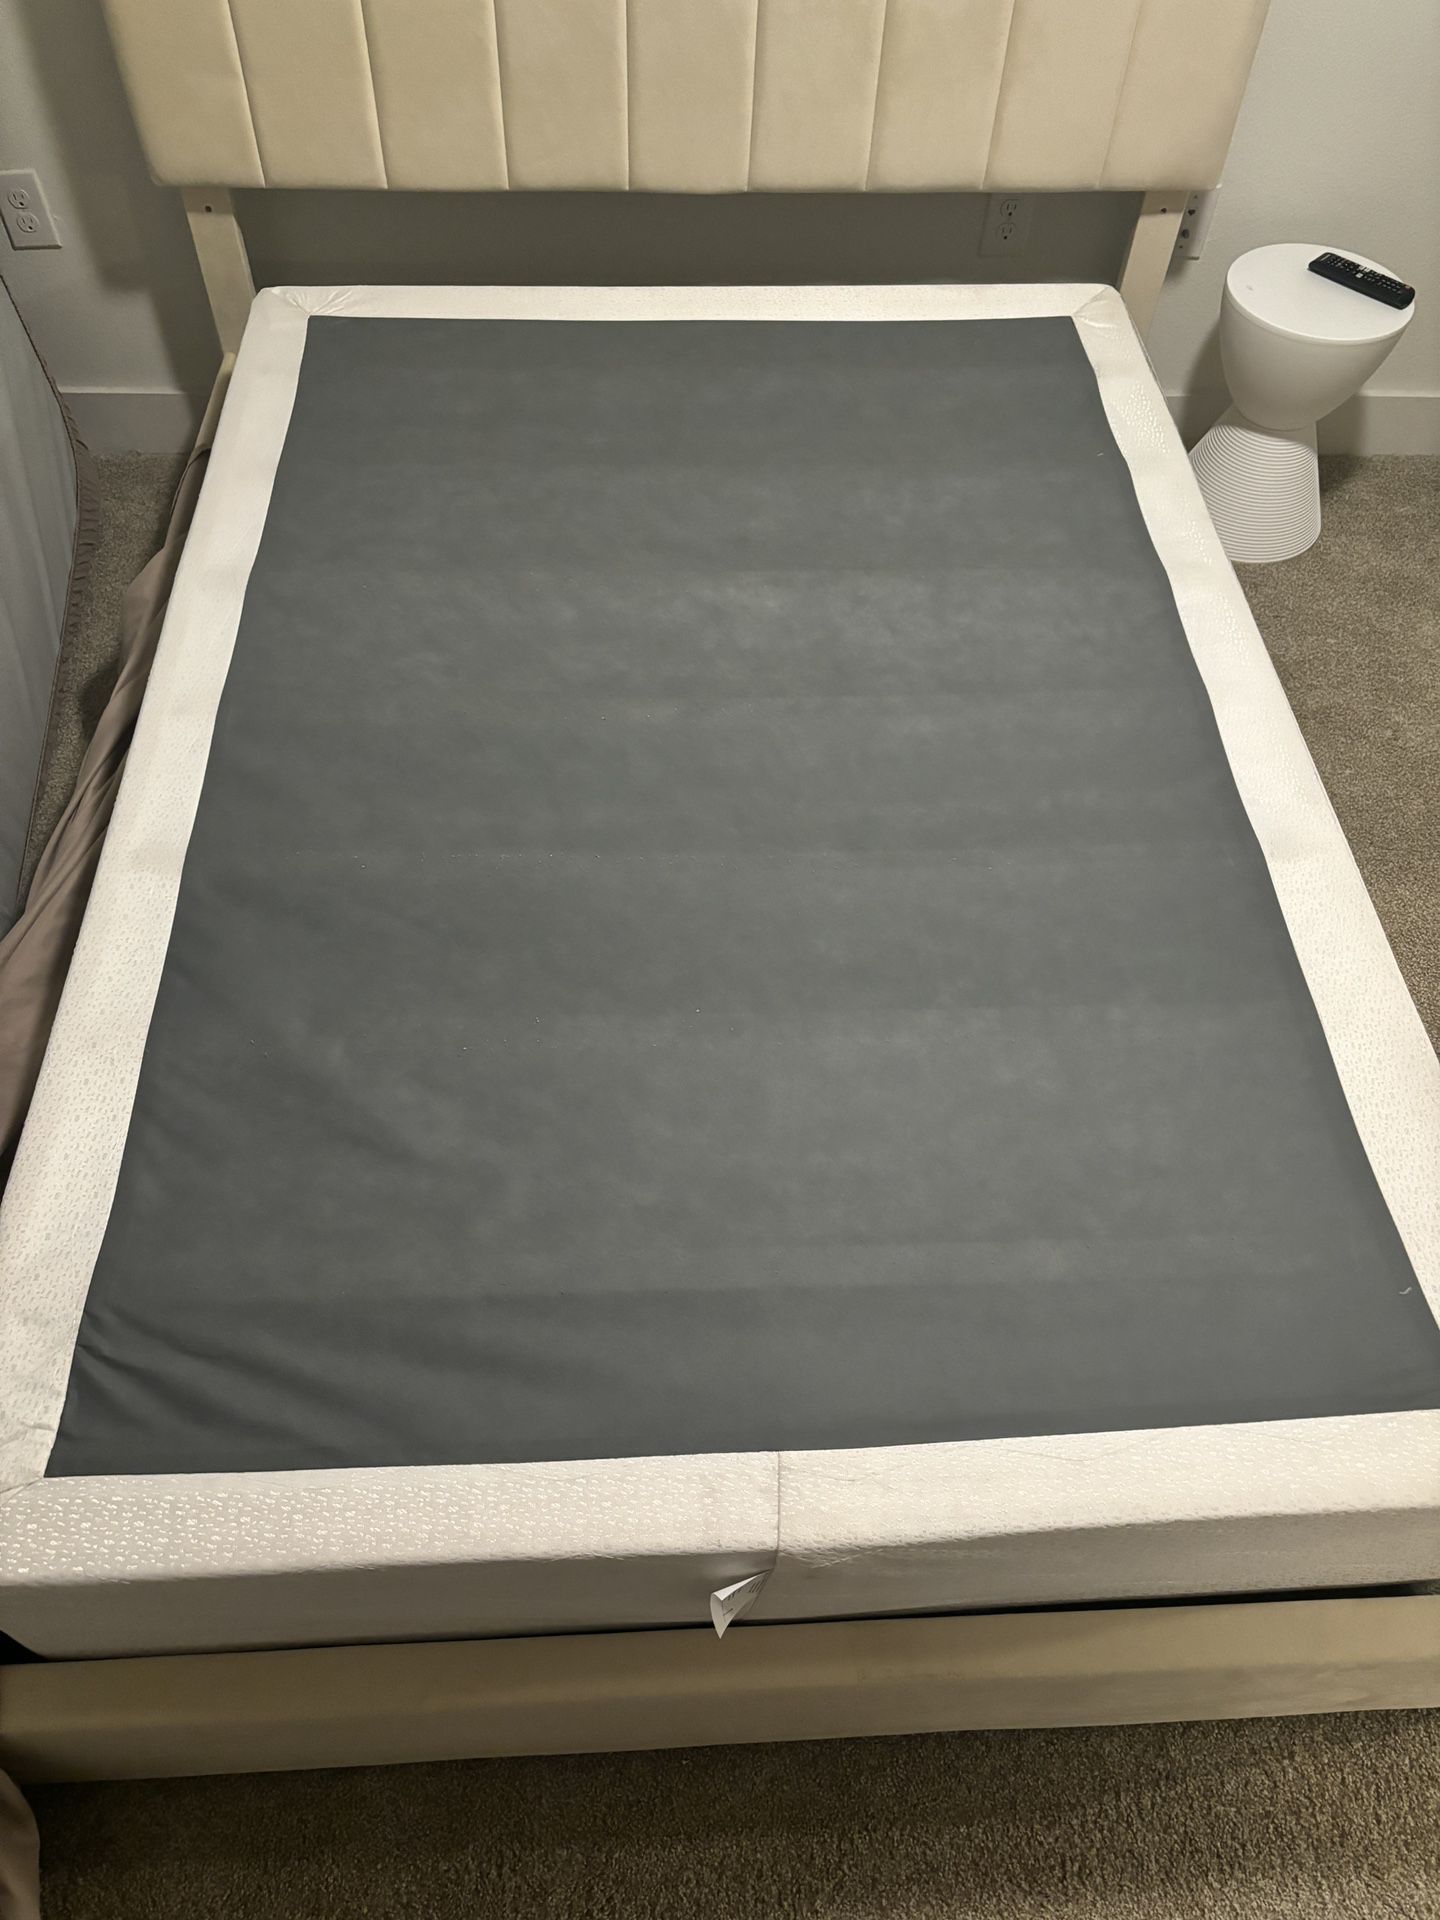 FULL SIZE MATTRESS AND BOX SPRING